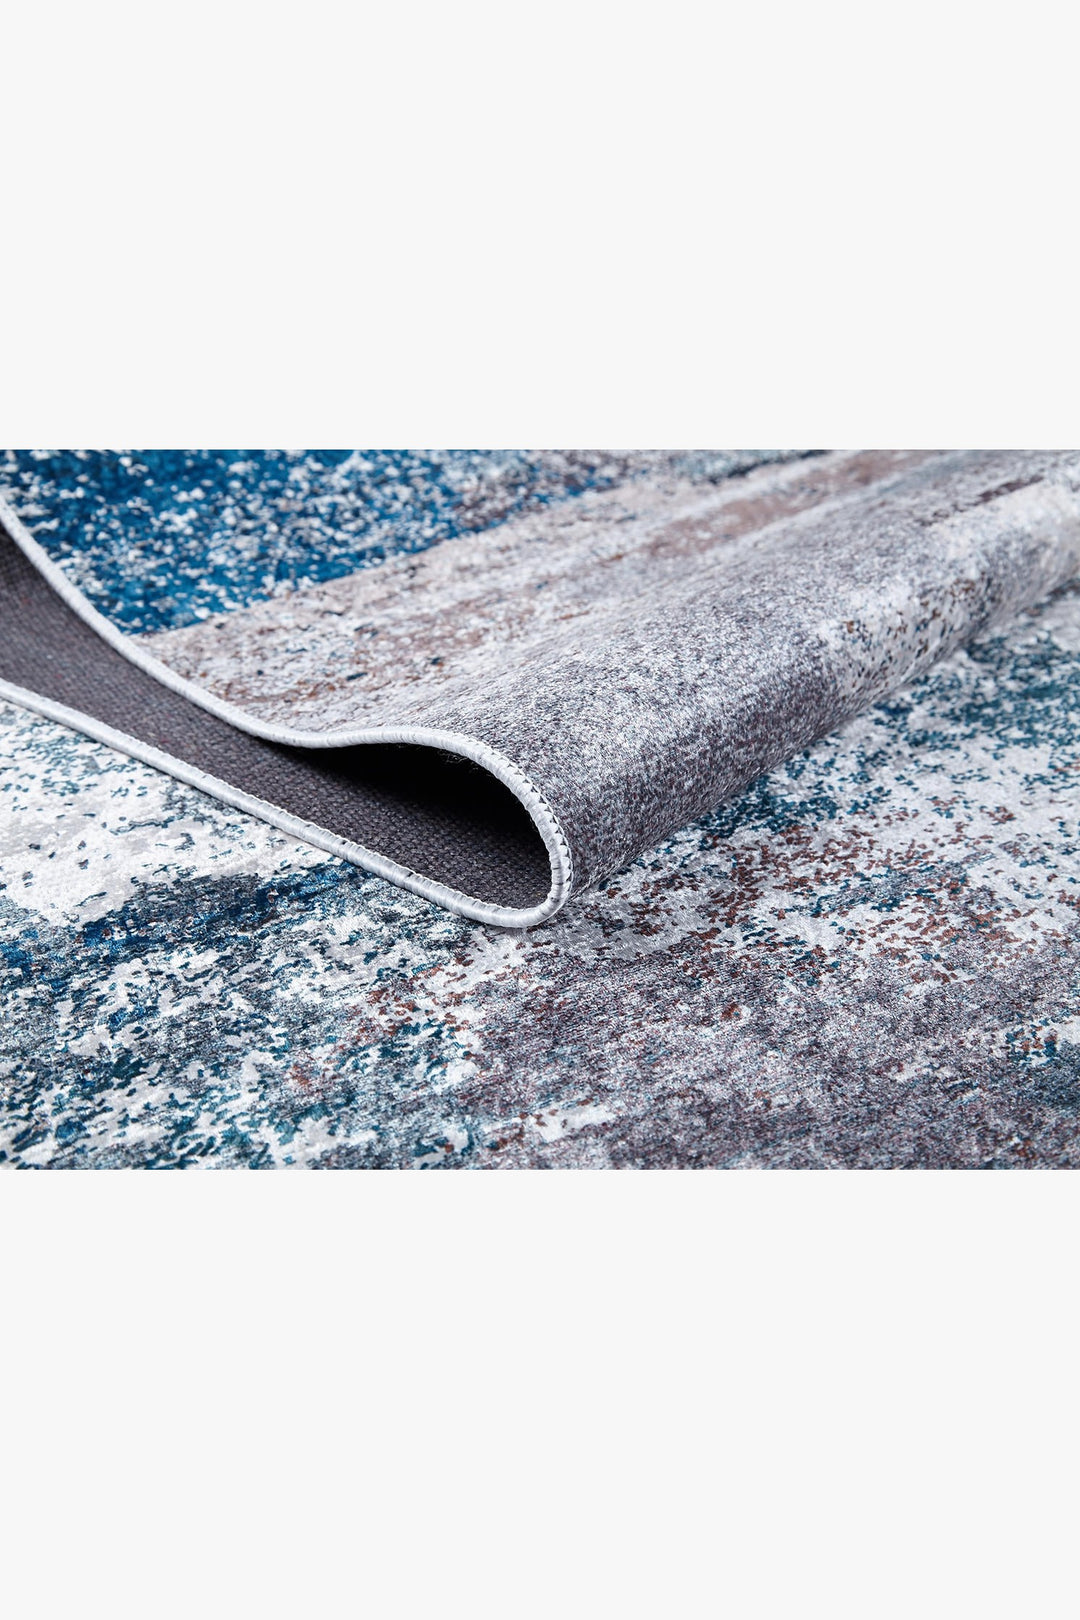 machine-washable-area-rug-Abstract-Modern-Collection-Blue-Gray-Anthracite-JR1815